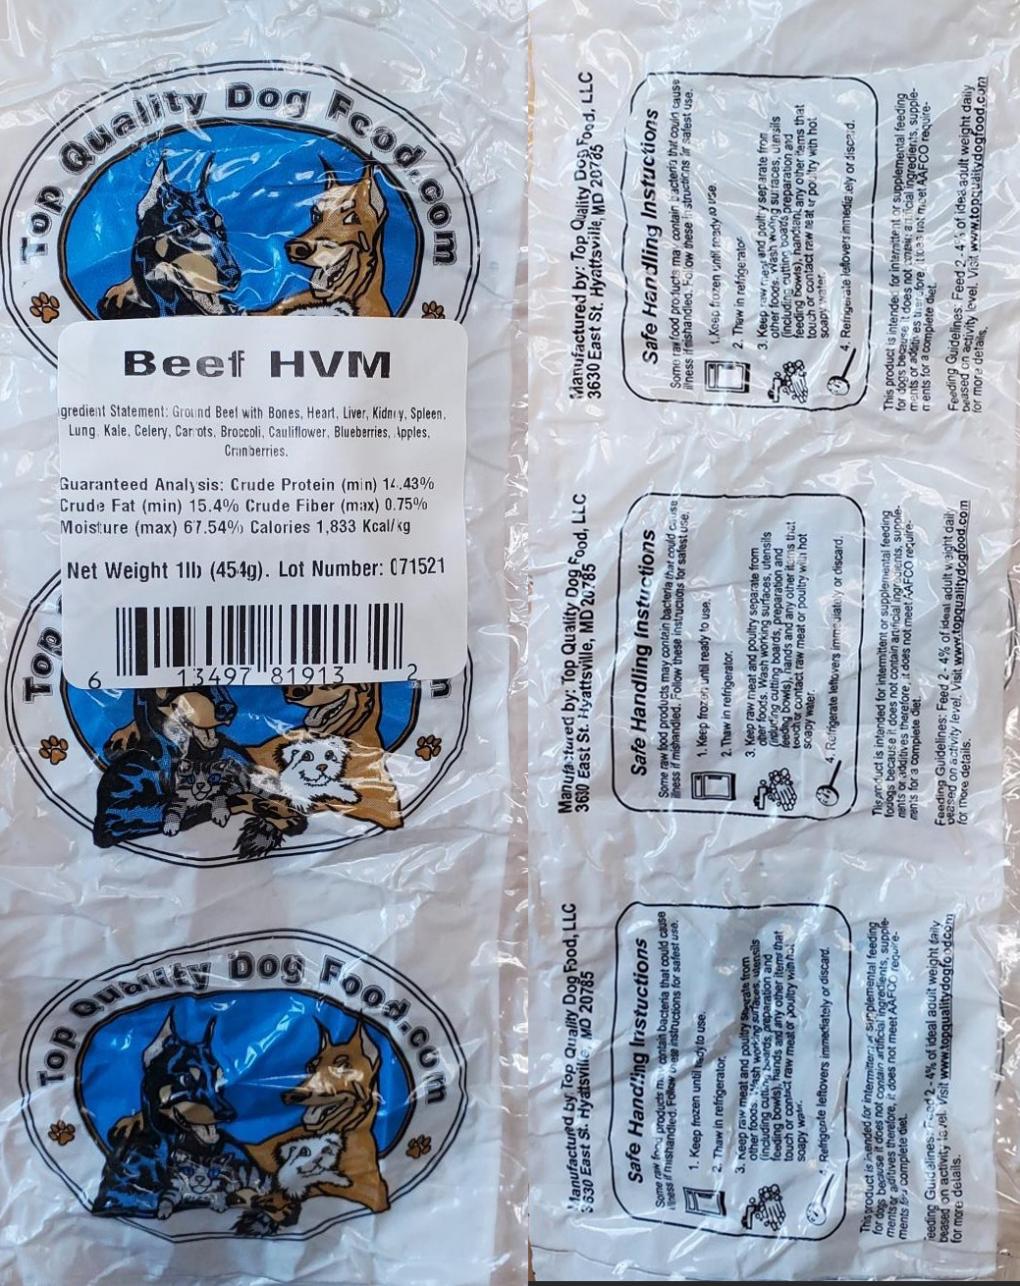 Top Quality dog food recalled Beef HVM due to Salmonella and Listeria Monocytogenes